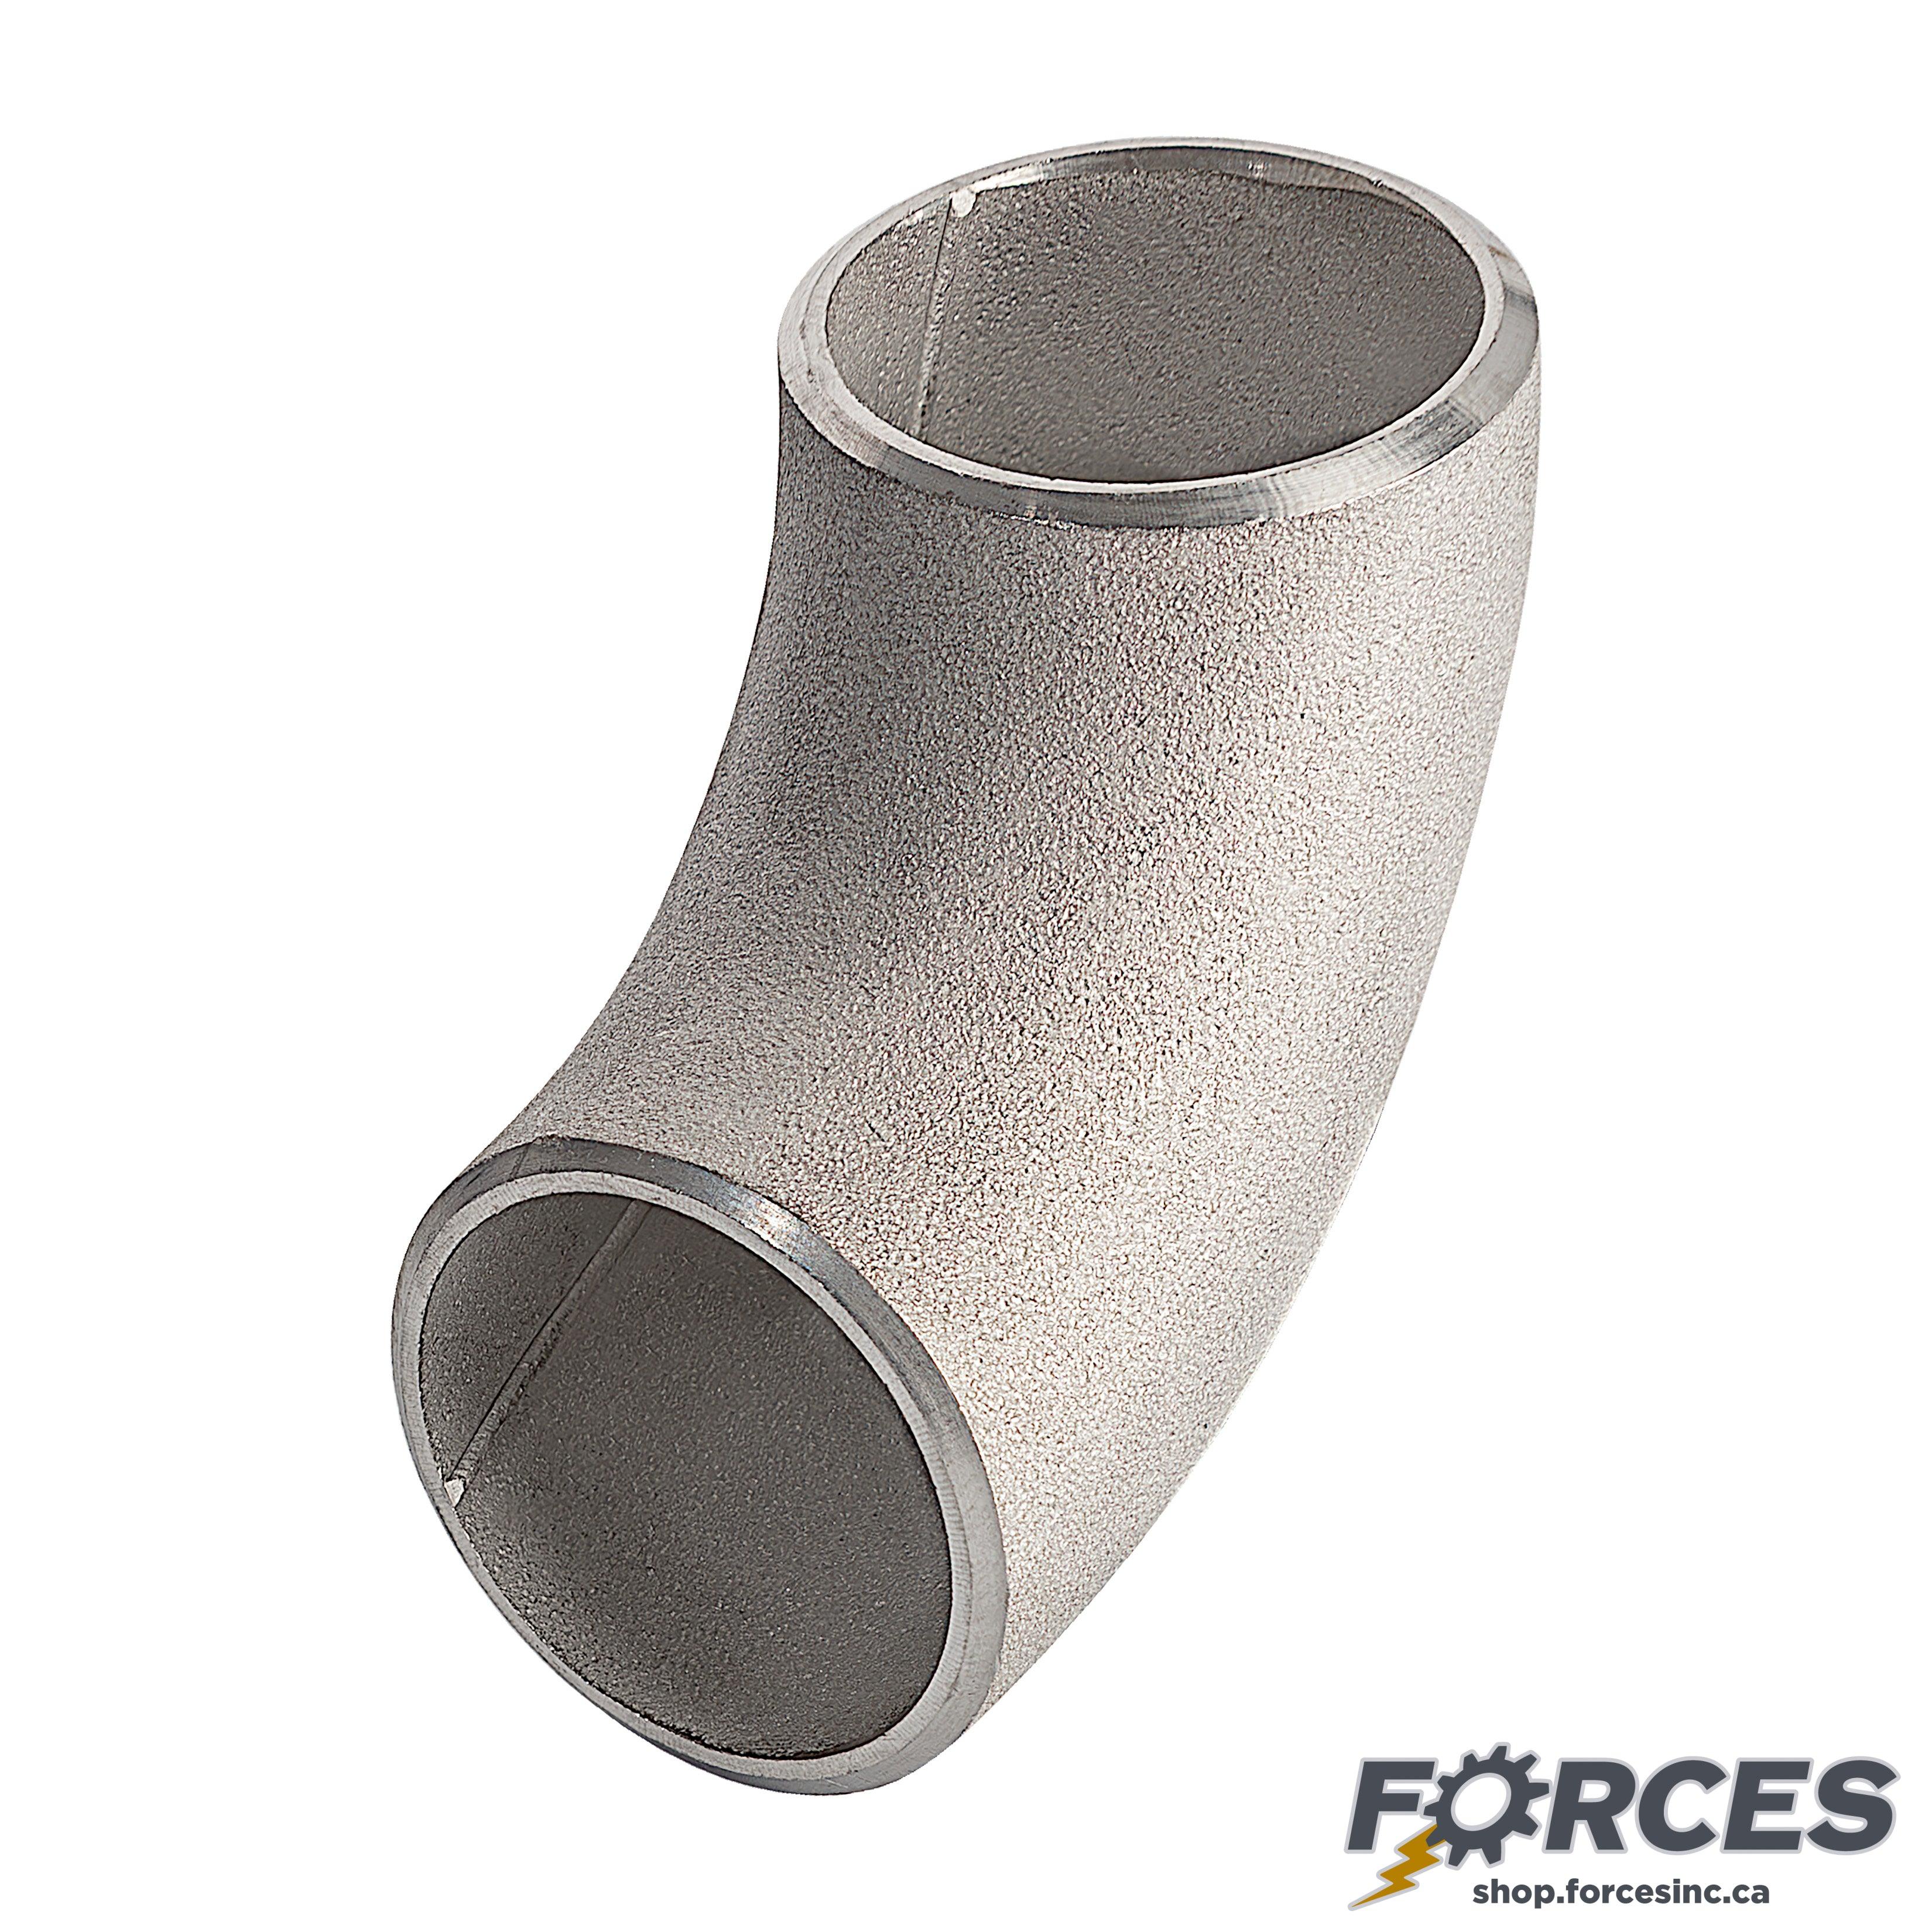 2-1/2" Elbow 90° SCH 10 Butt Weld - Stainless Steel 316 - Forces Inc